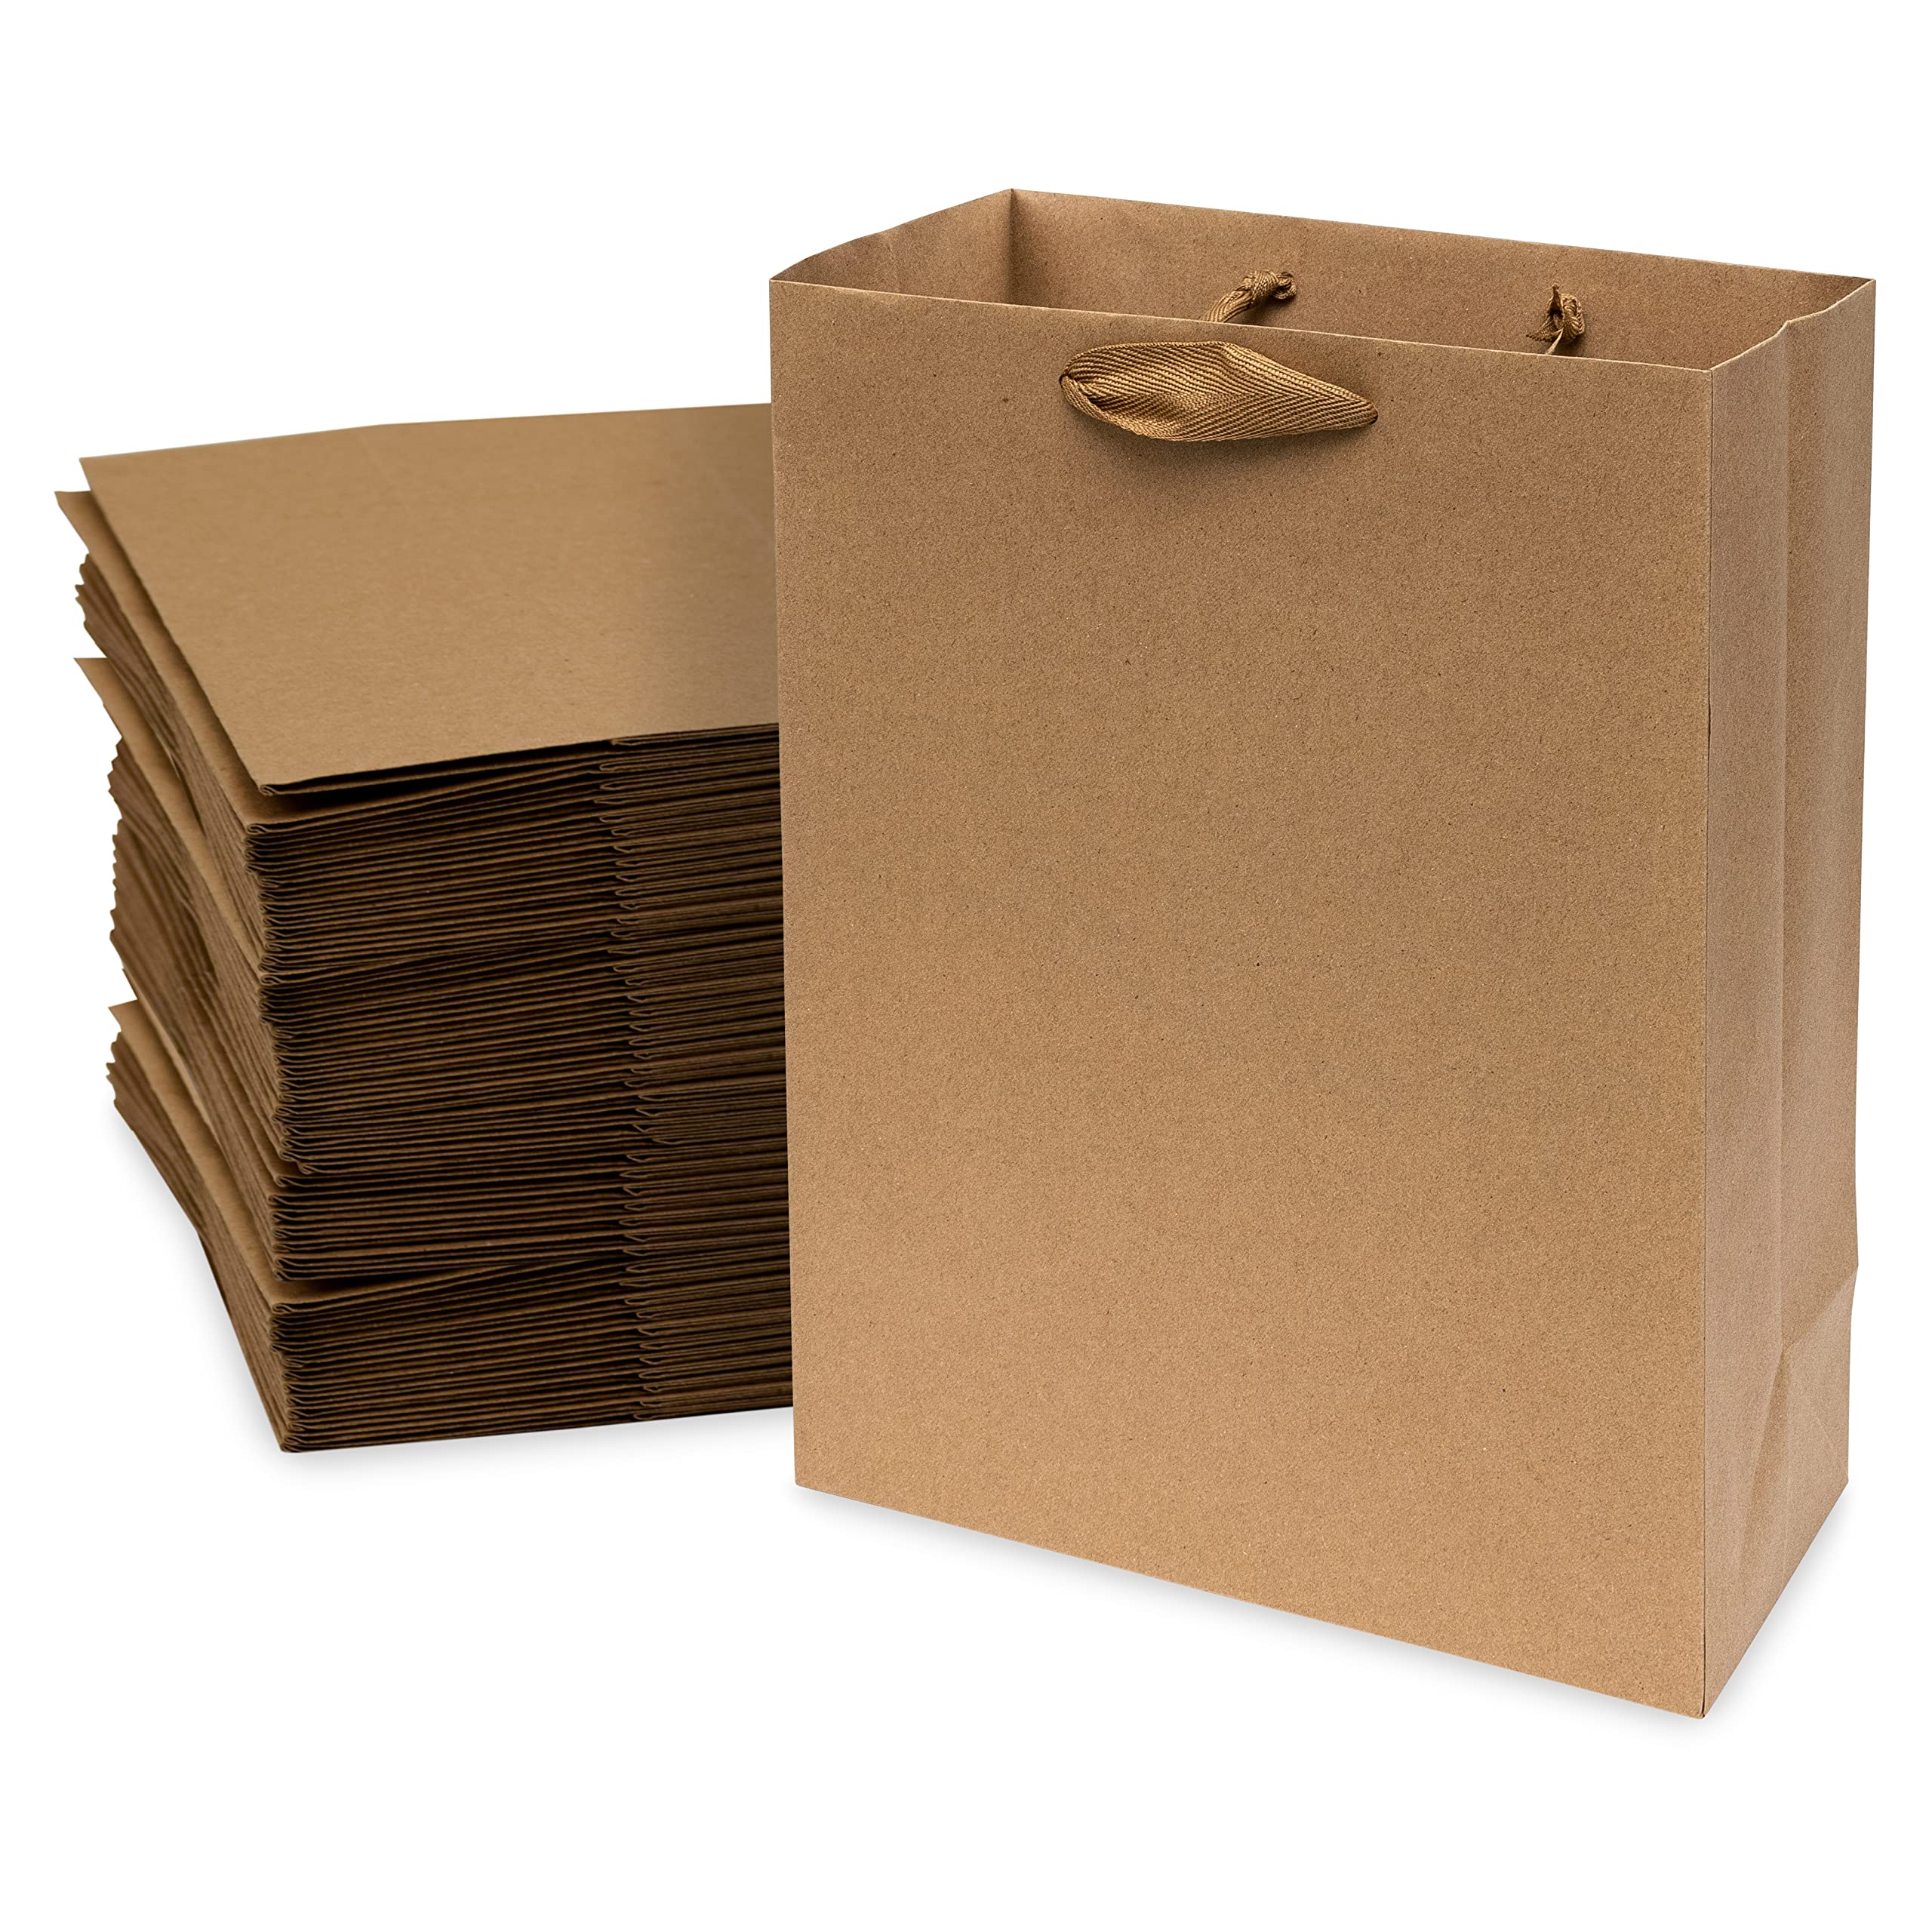 Brown Gift Bags with Handles - 10x5x13 50 Pack Medium Size Boutique Bags, Luxury Ribbon Handle Kraft Paper Shopping Bags for Small Business, Wedding, Party Favor Bags, Gift Wrapping, Goodie Bags, Bulk  - Very Good